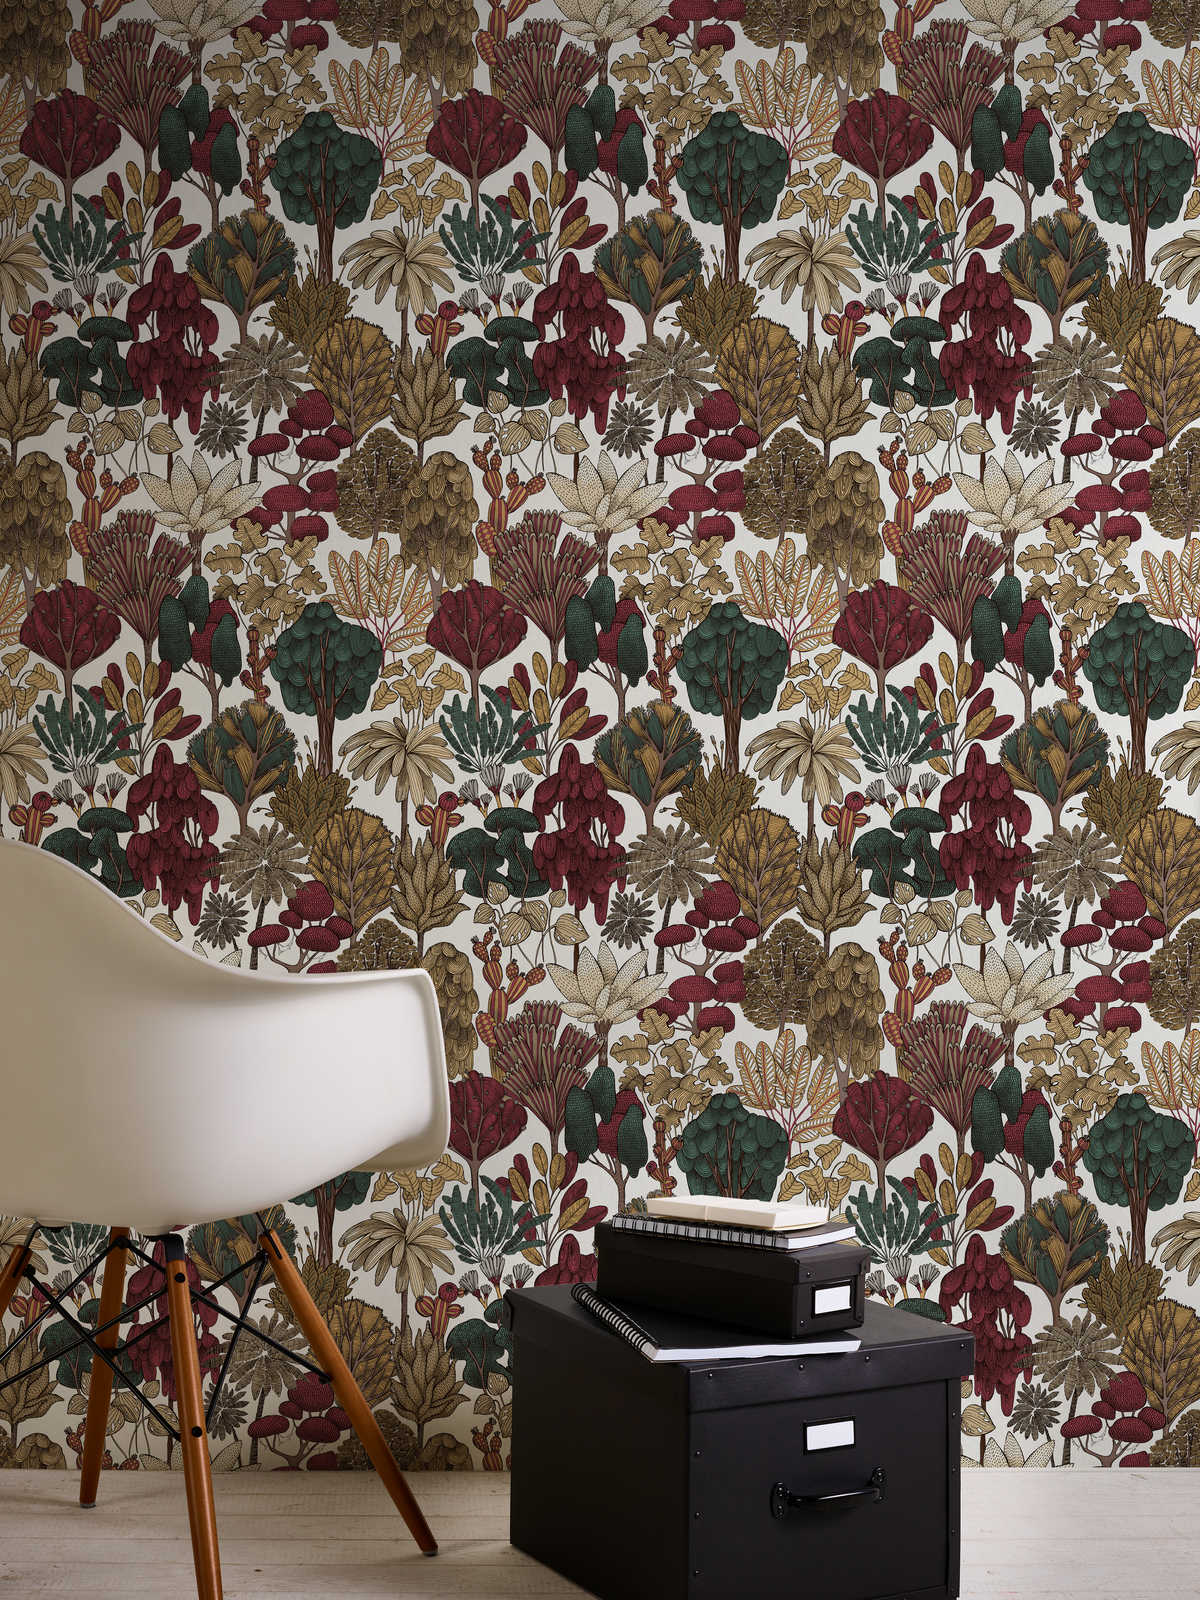             Modern wallpaper floral with trees in drawing style - red, beige, brown
        